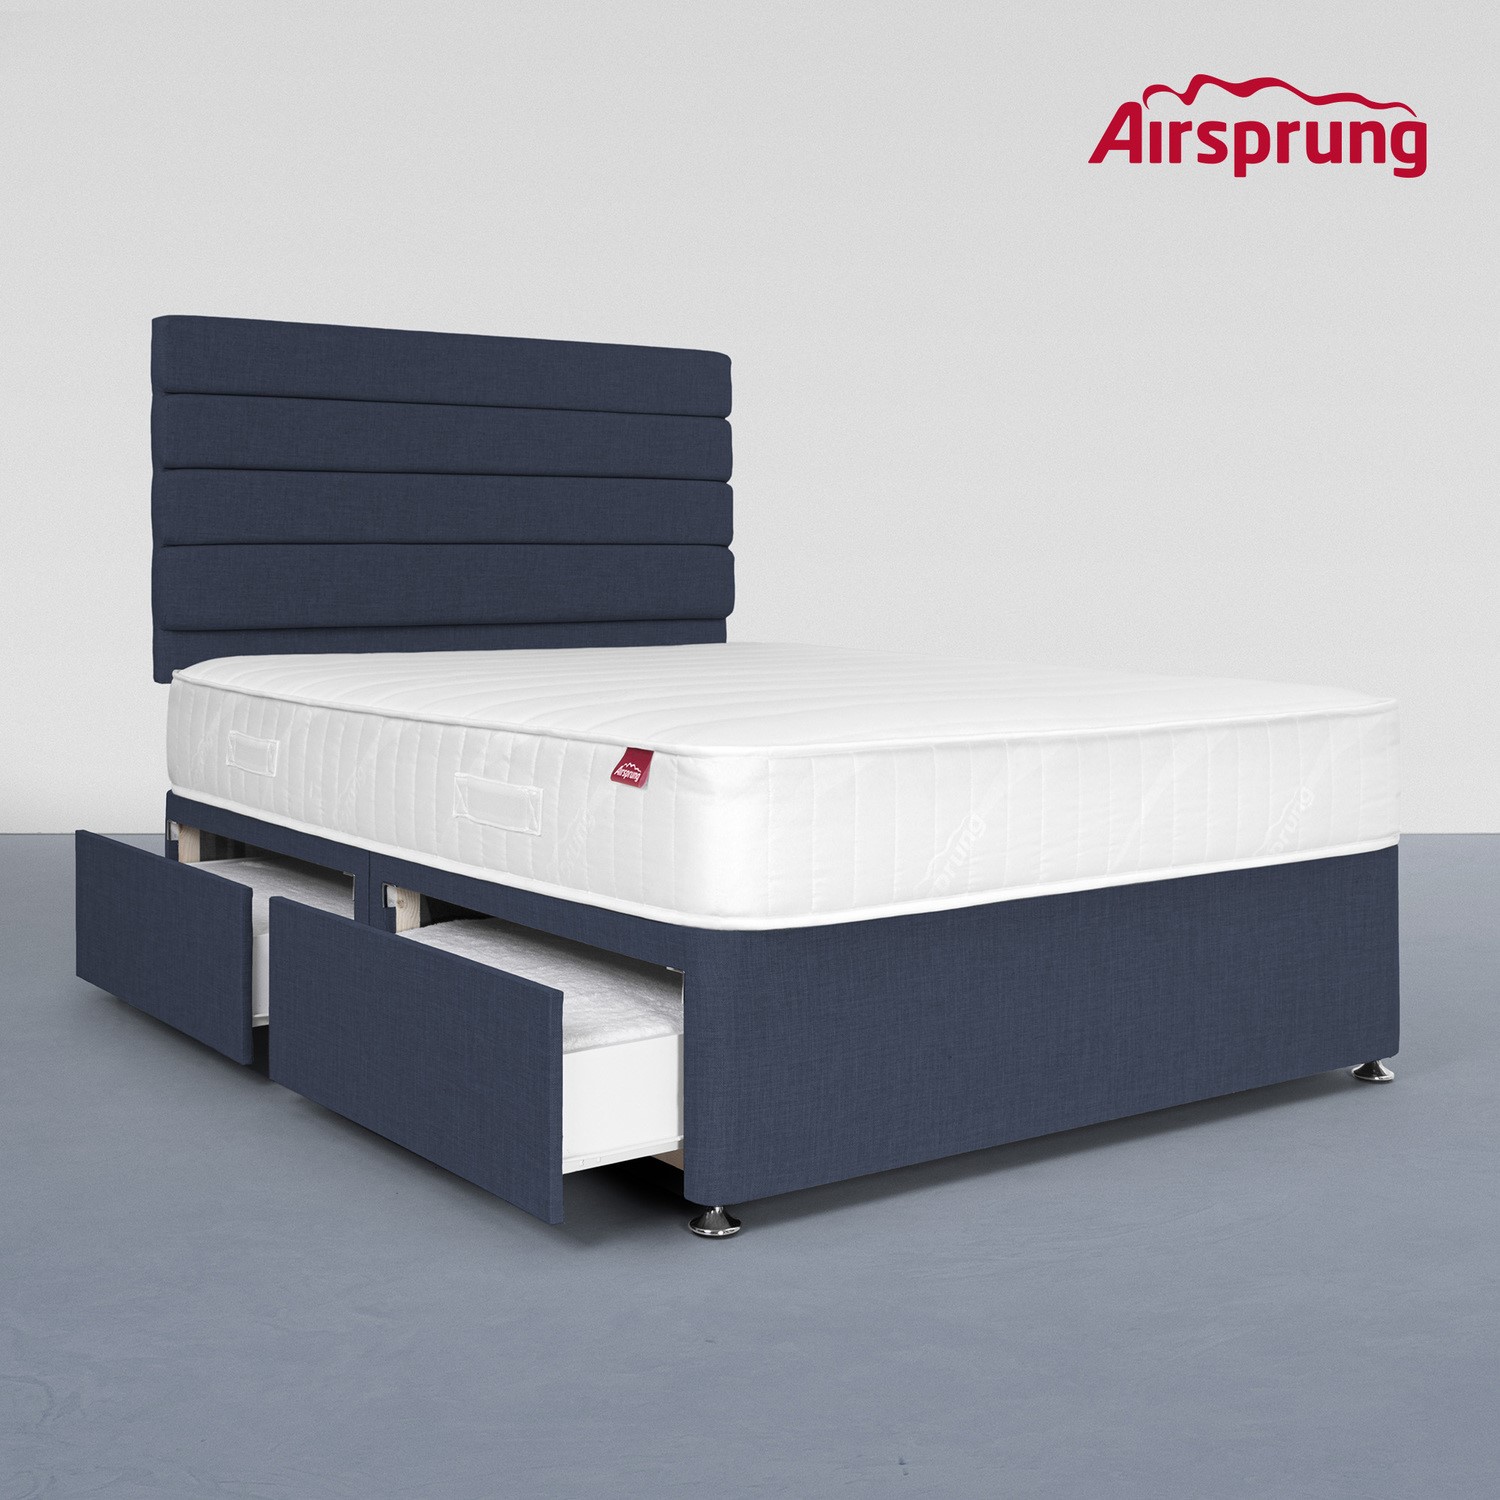 Read more about Airsprung small double 4 drawer divan bed with comfort mattress midnight blue